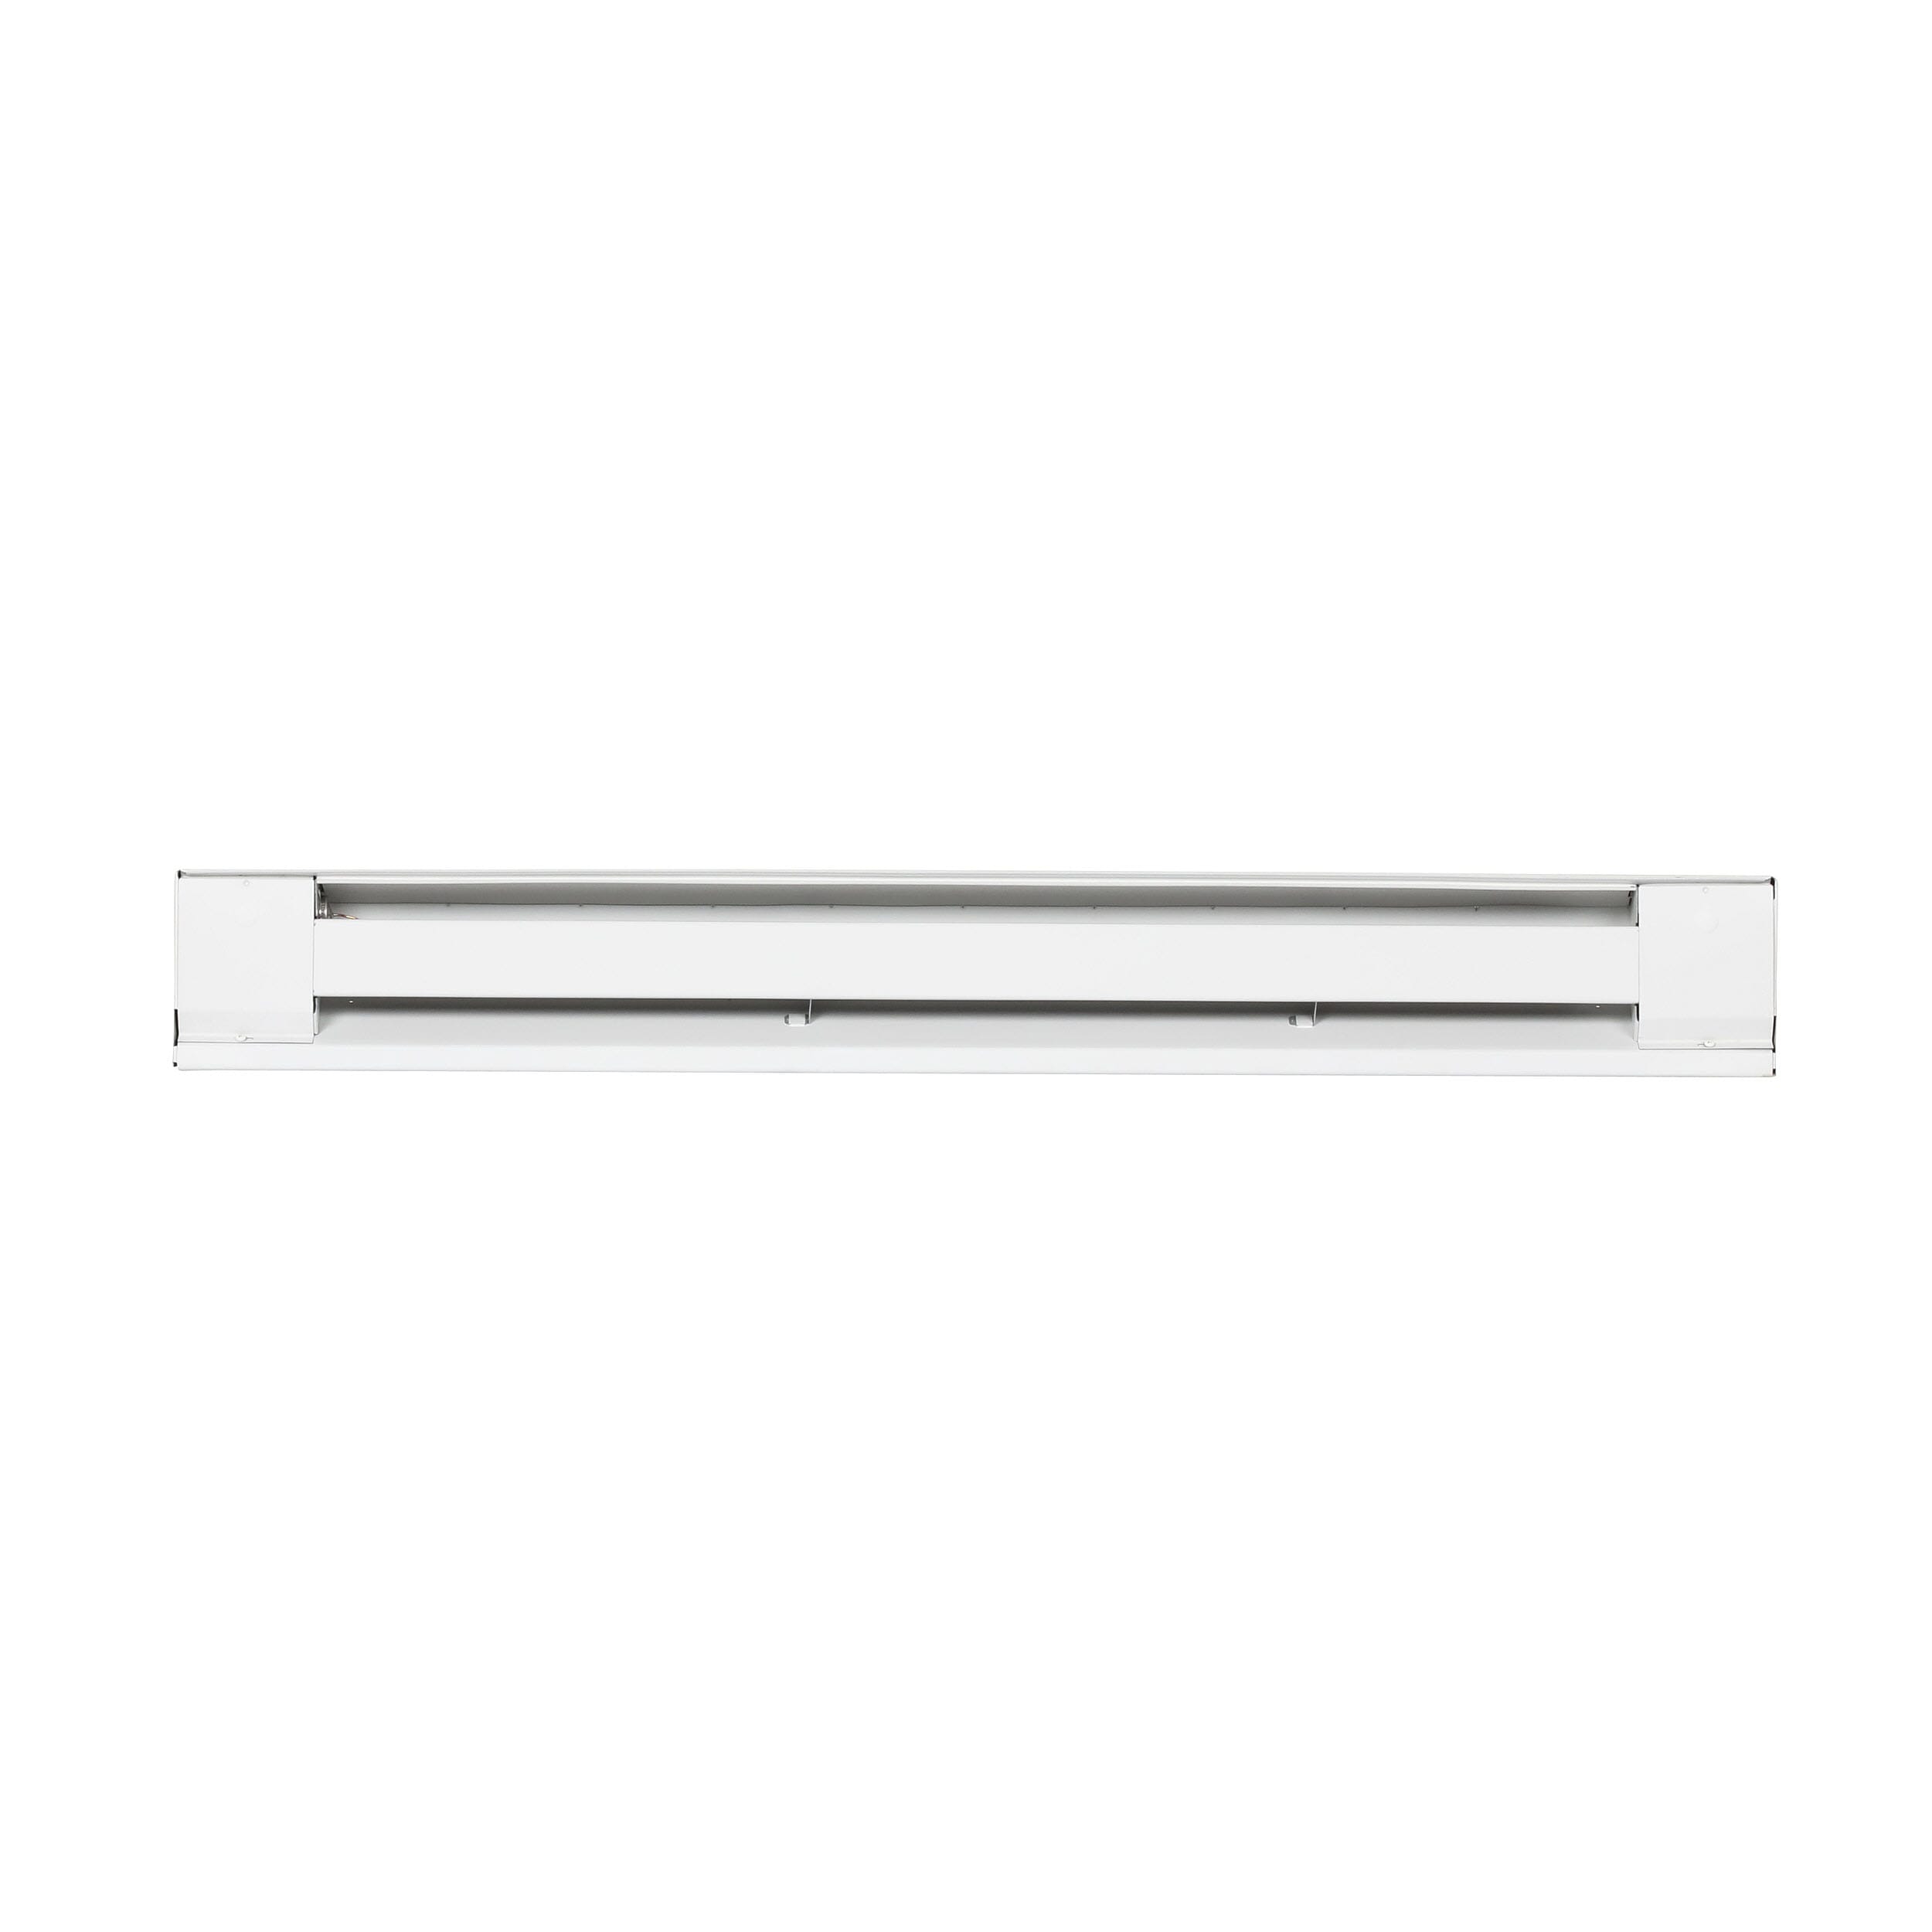 Single Phase Stainless Steel Element Convection Heater TPI G2906036SW 2900S Series Electric Baseboard 600/450W White TPI Corporation